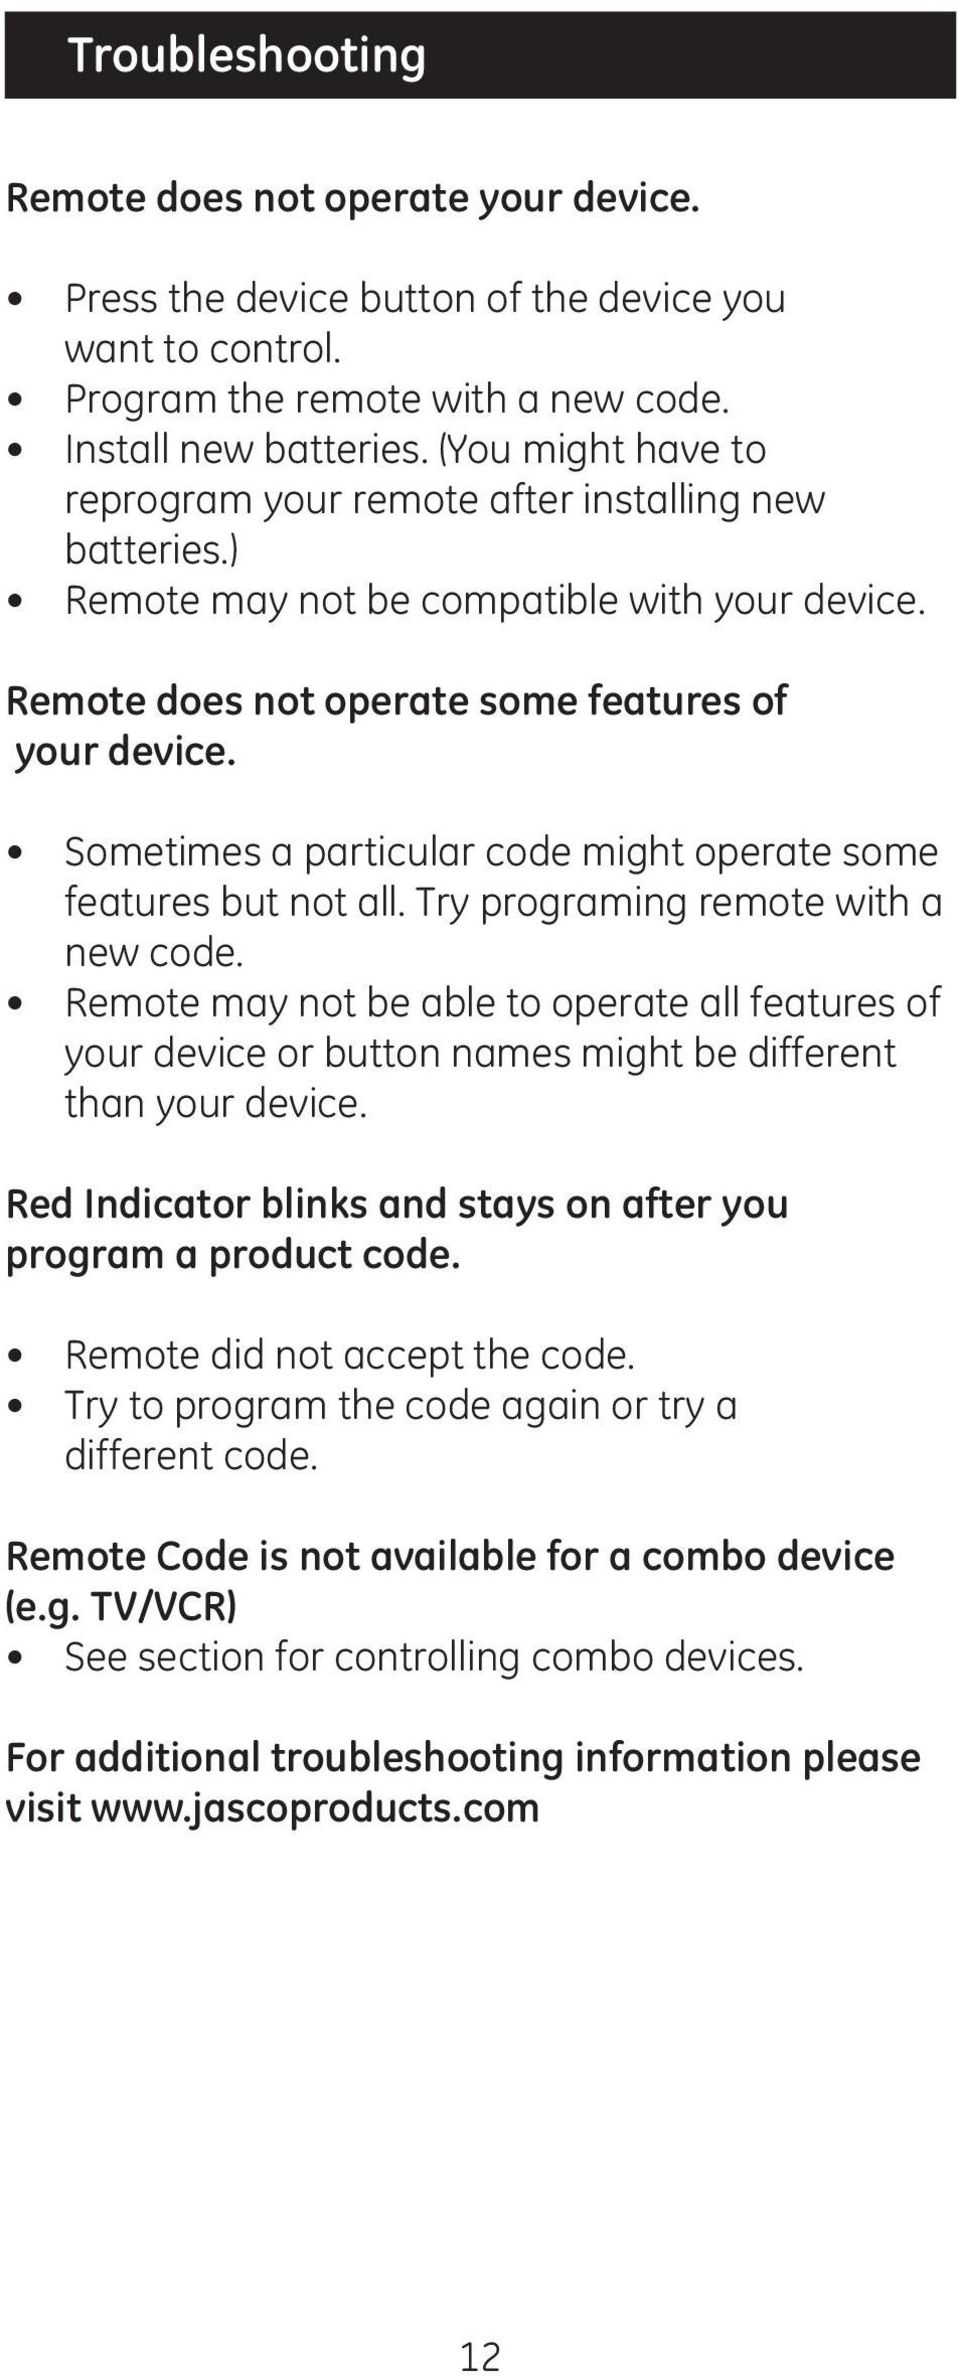 Sometimes a particular code might operate some features but not all. Try programing remote with a new code.